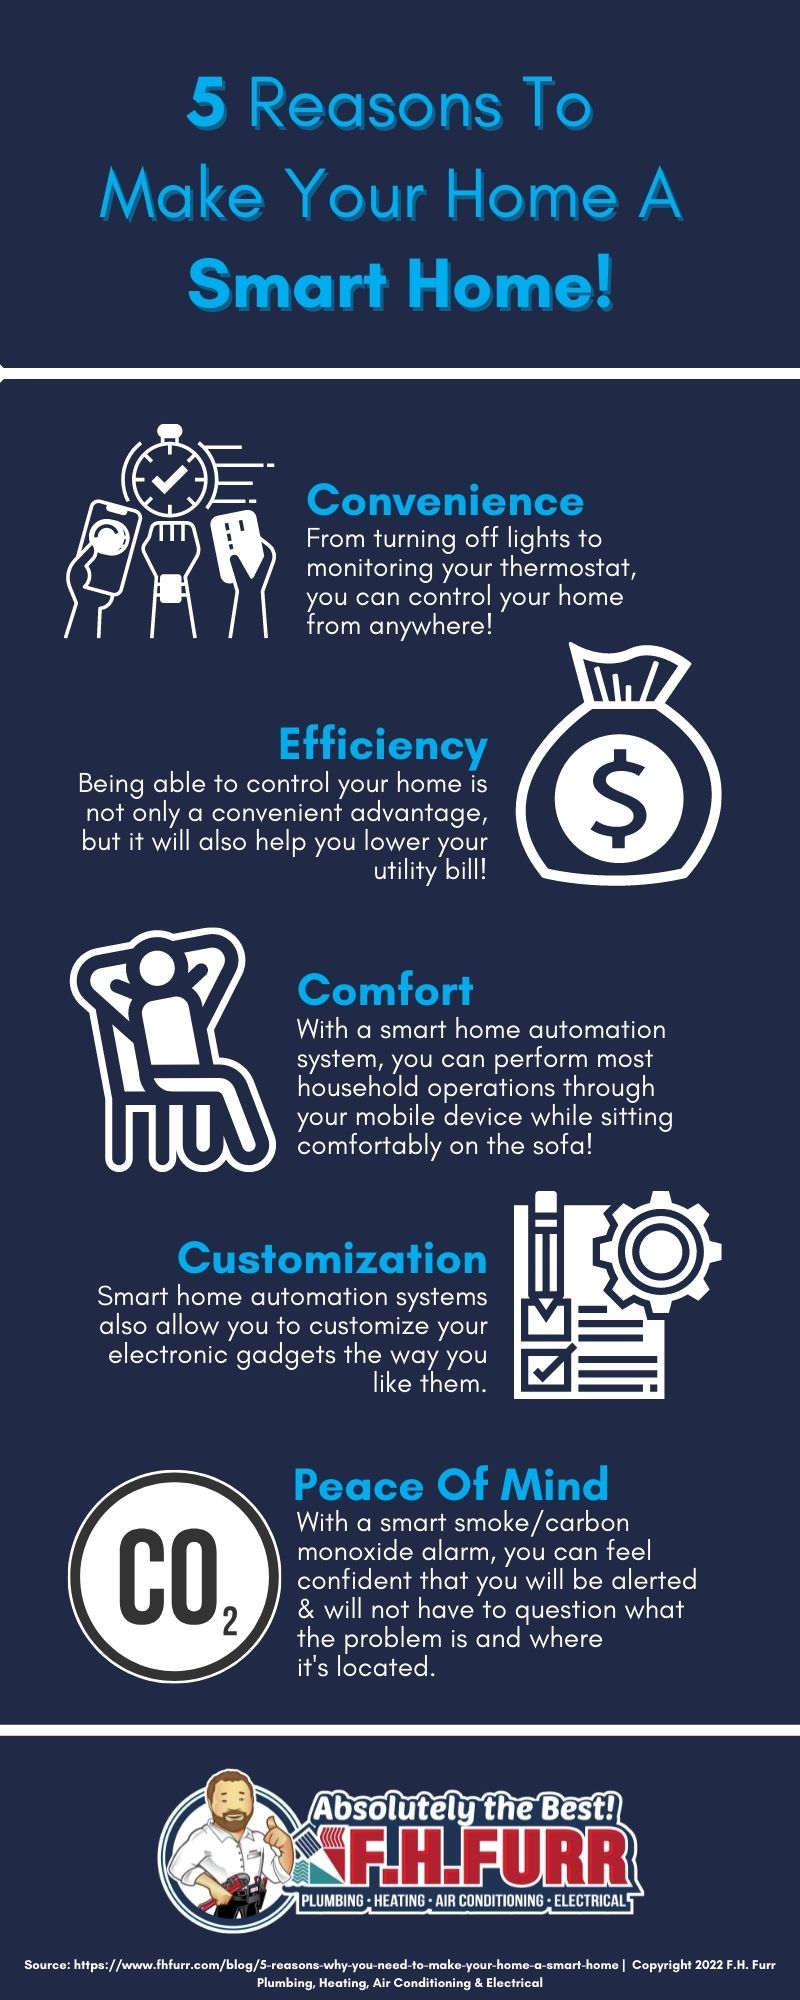 Infographic: 5 Reasons To Make Your Home A Smart Home